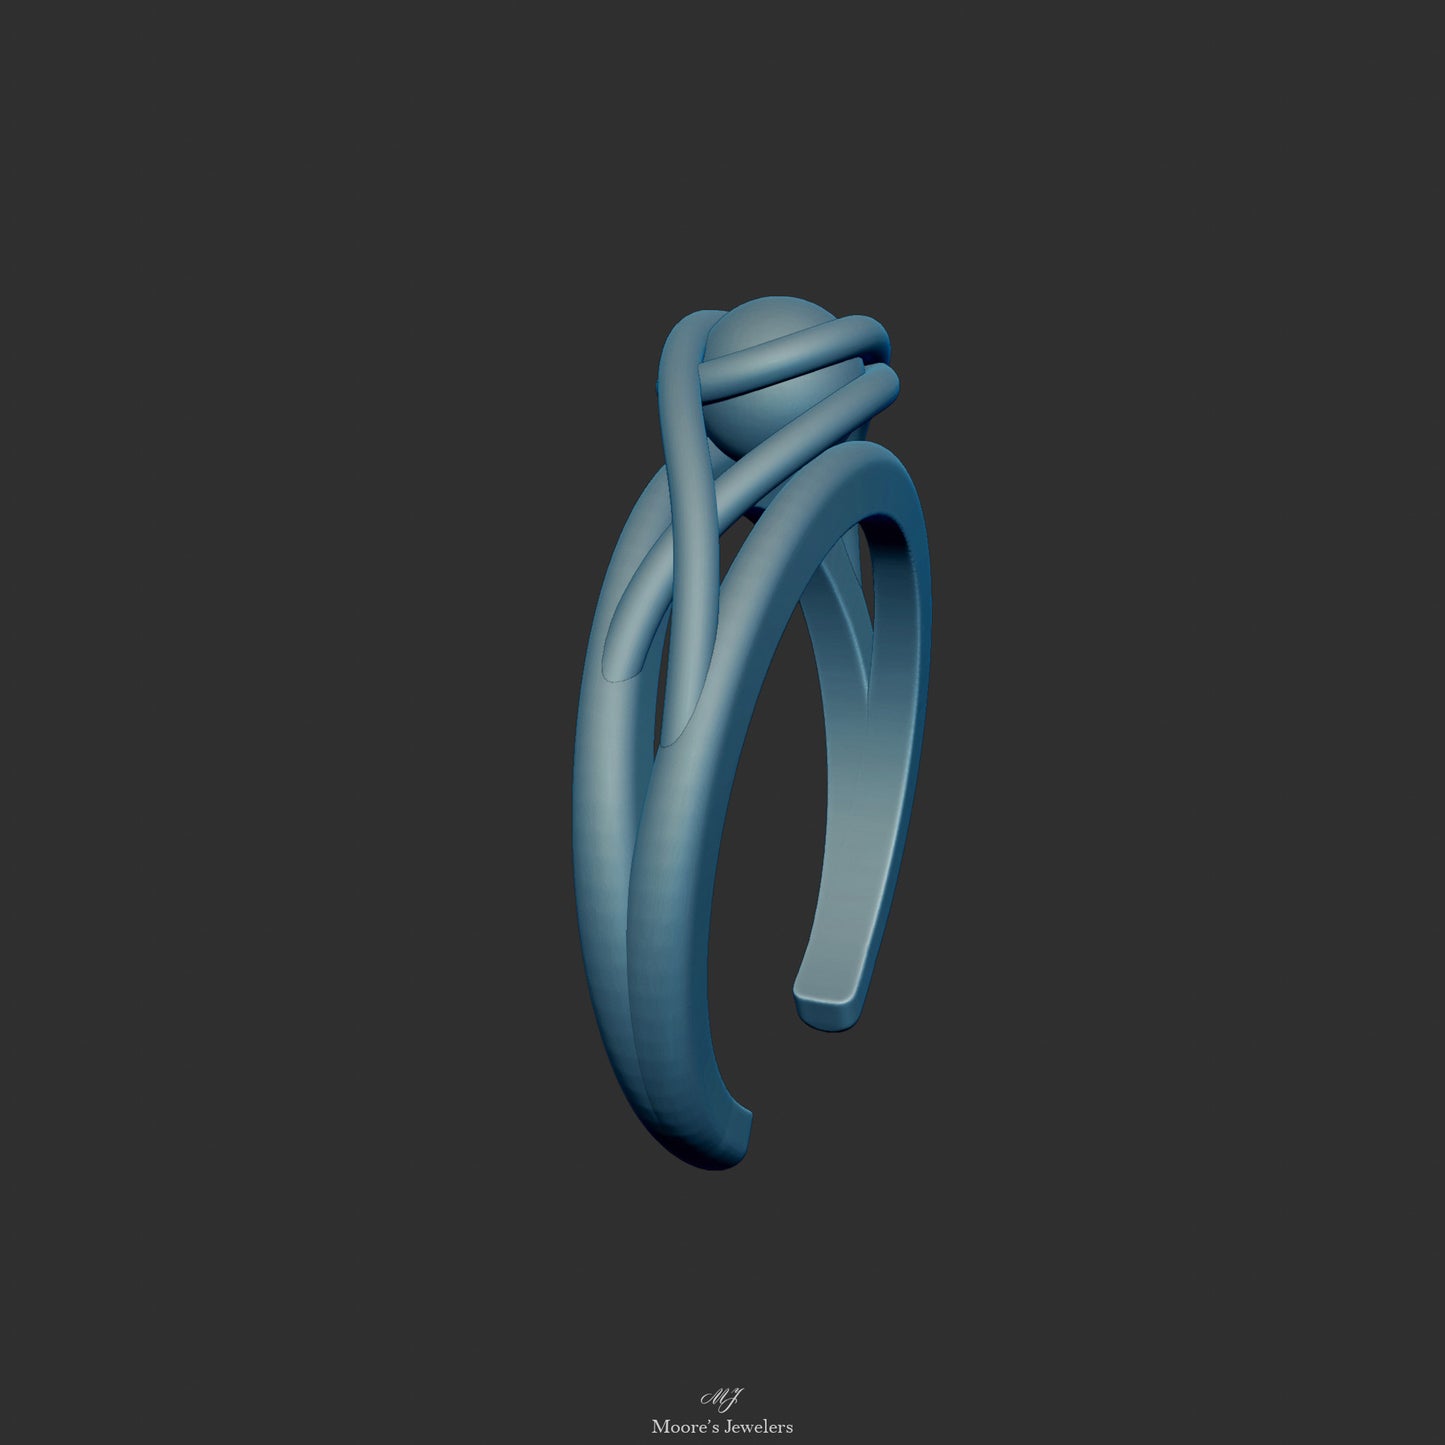 Infinity Sphere Ring 3d Model (Adjustable One Size Fits All)